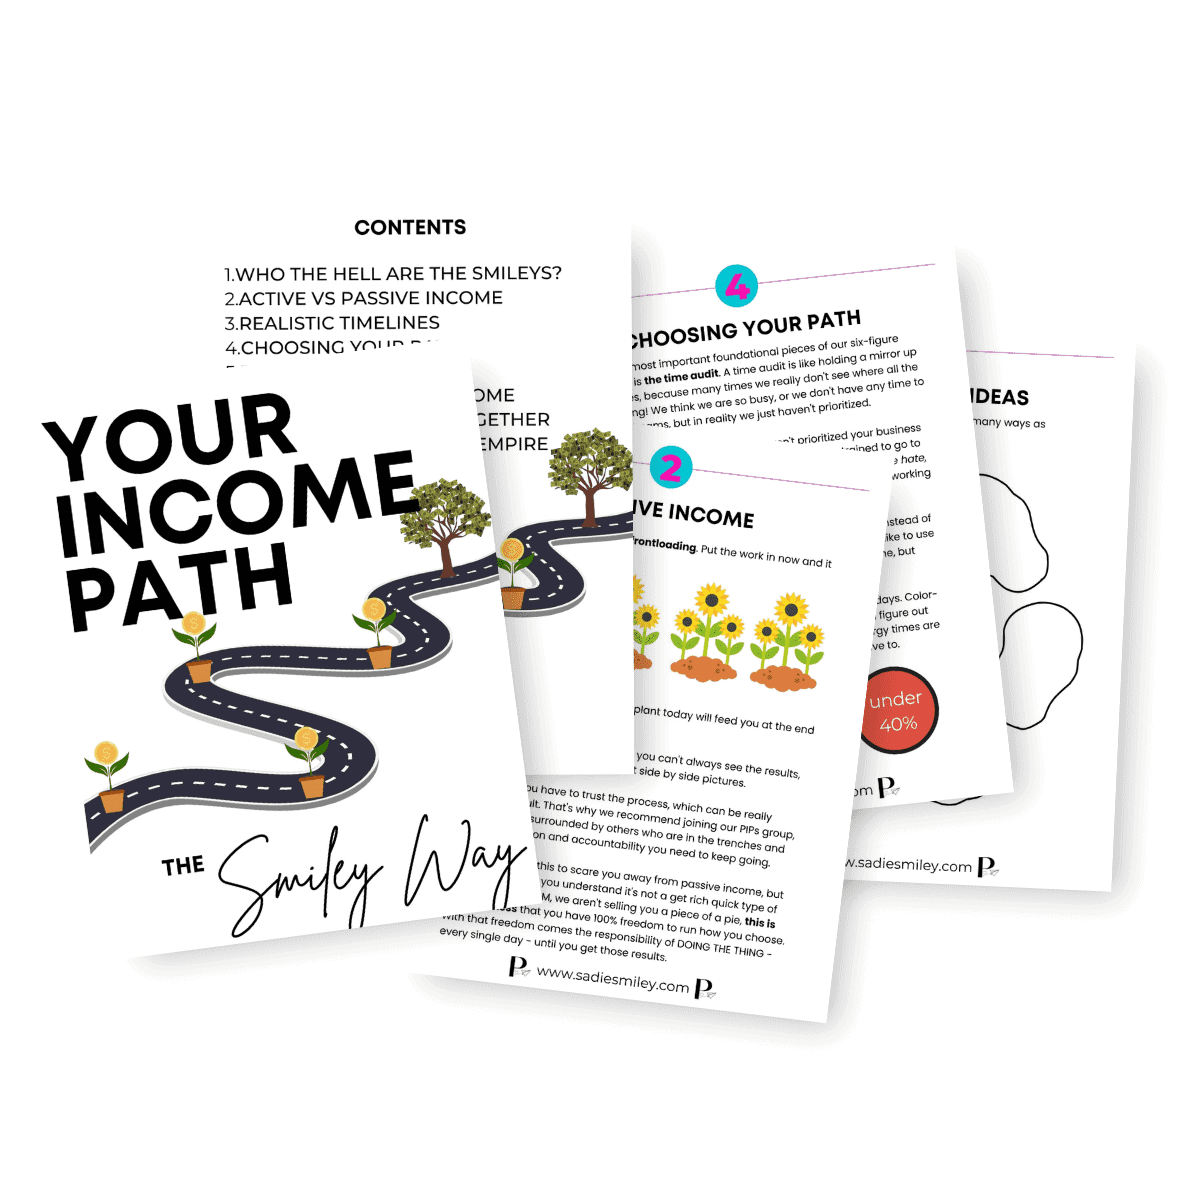 Your Income Path the Smiley Way